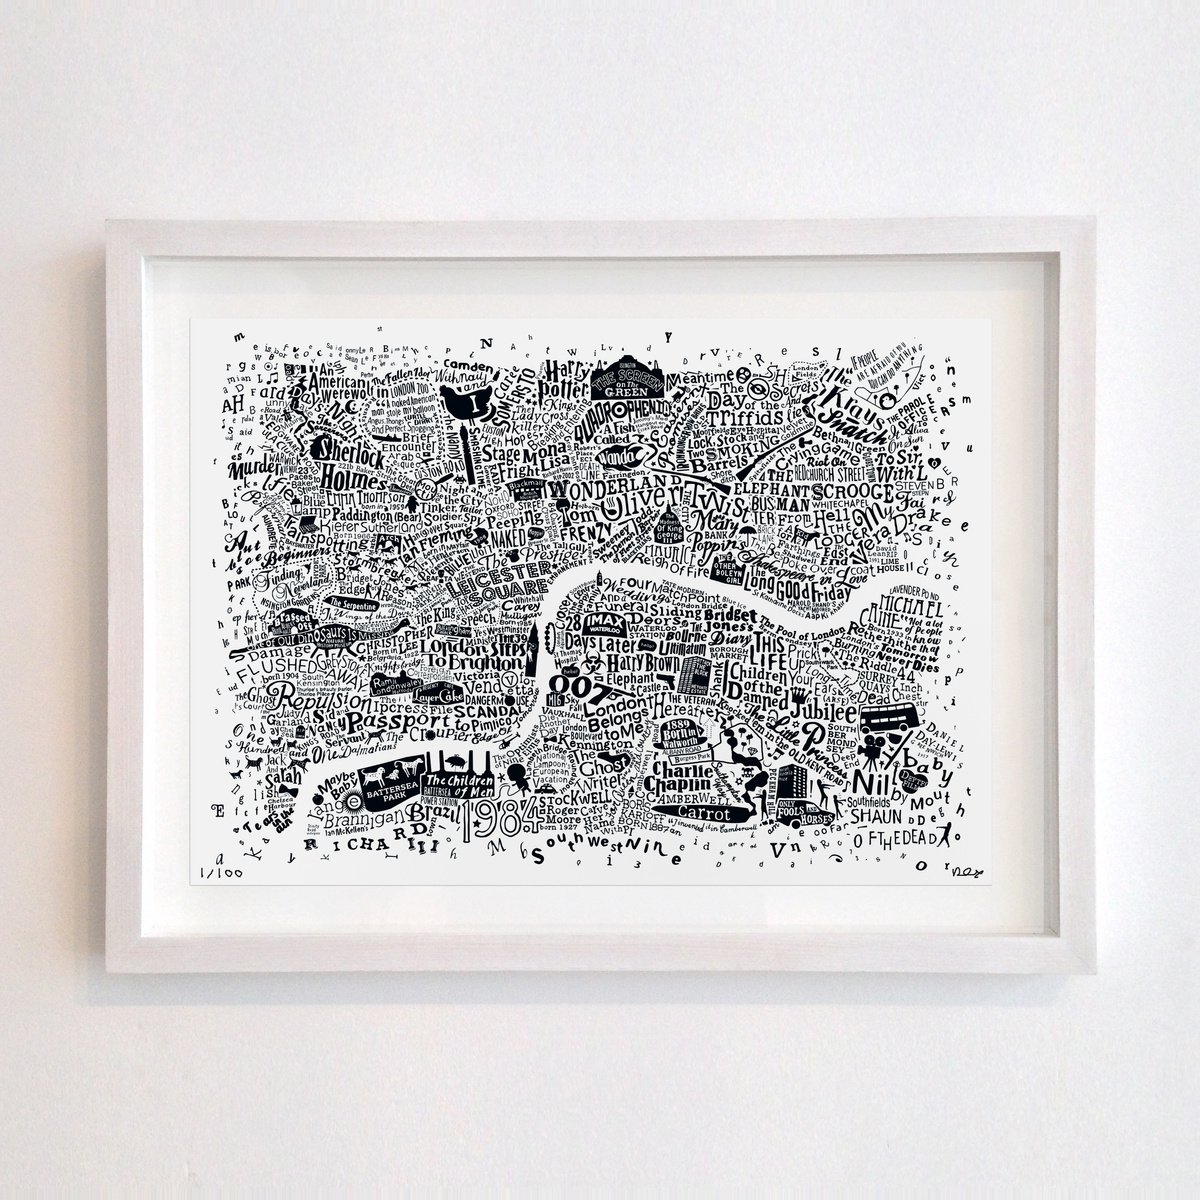 CENTRAL LONDON FILM MAP (White A3) by Dex